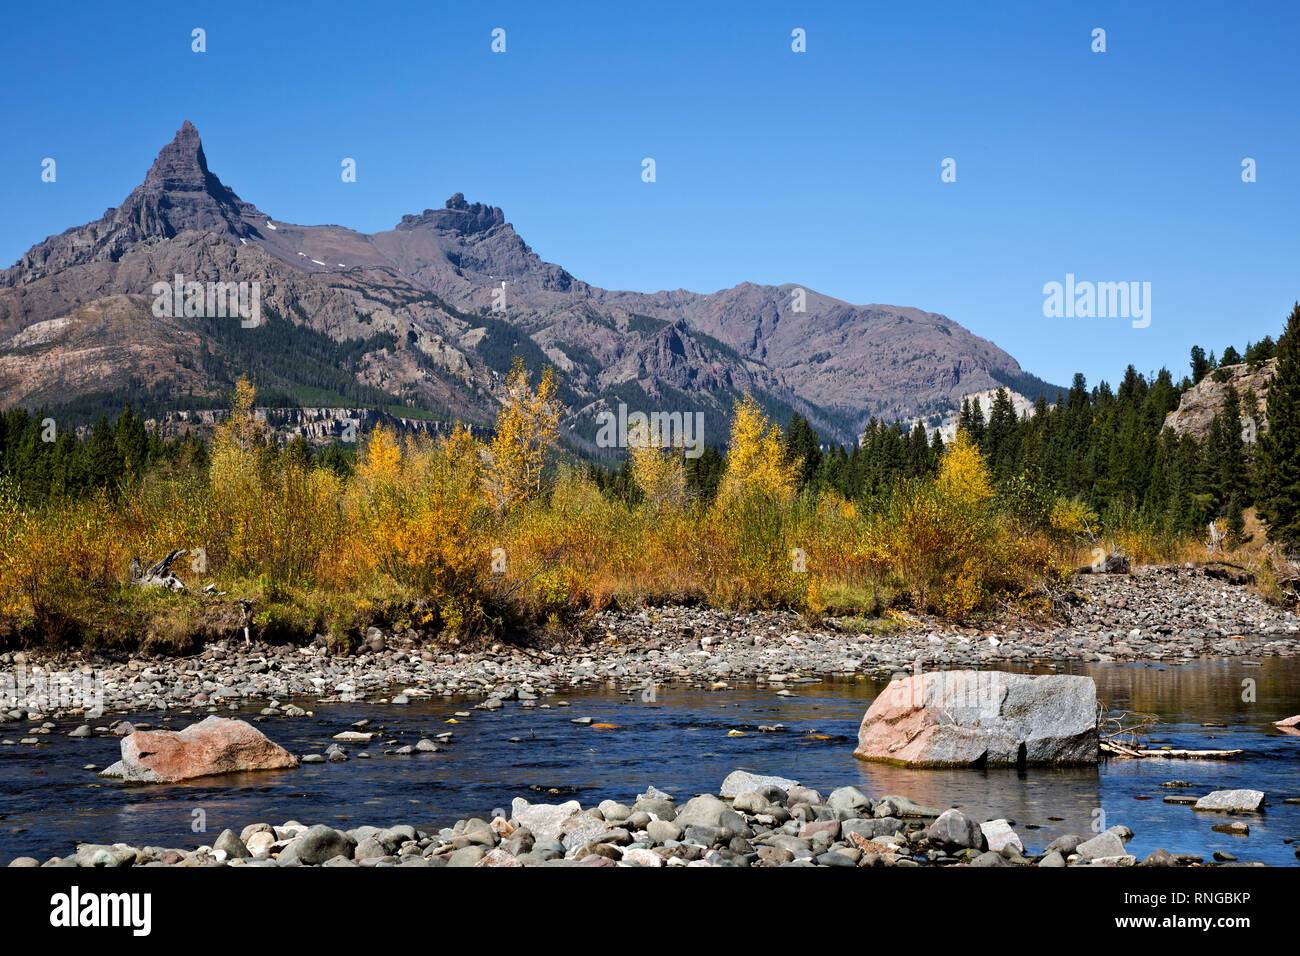 WYOMING - Fall color along the banks of the Clark Fork of the Yellowstone River below Pilot and Index Peaks, in the Shoshone National Forest. Stock Photo